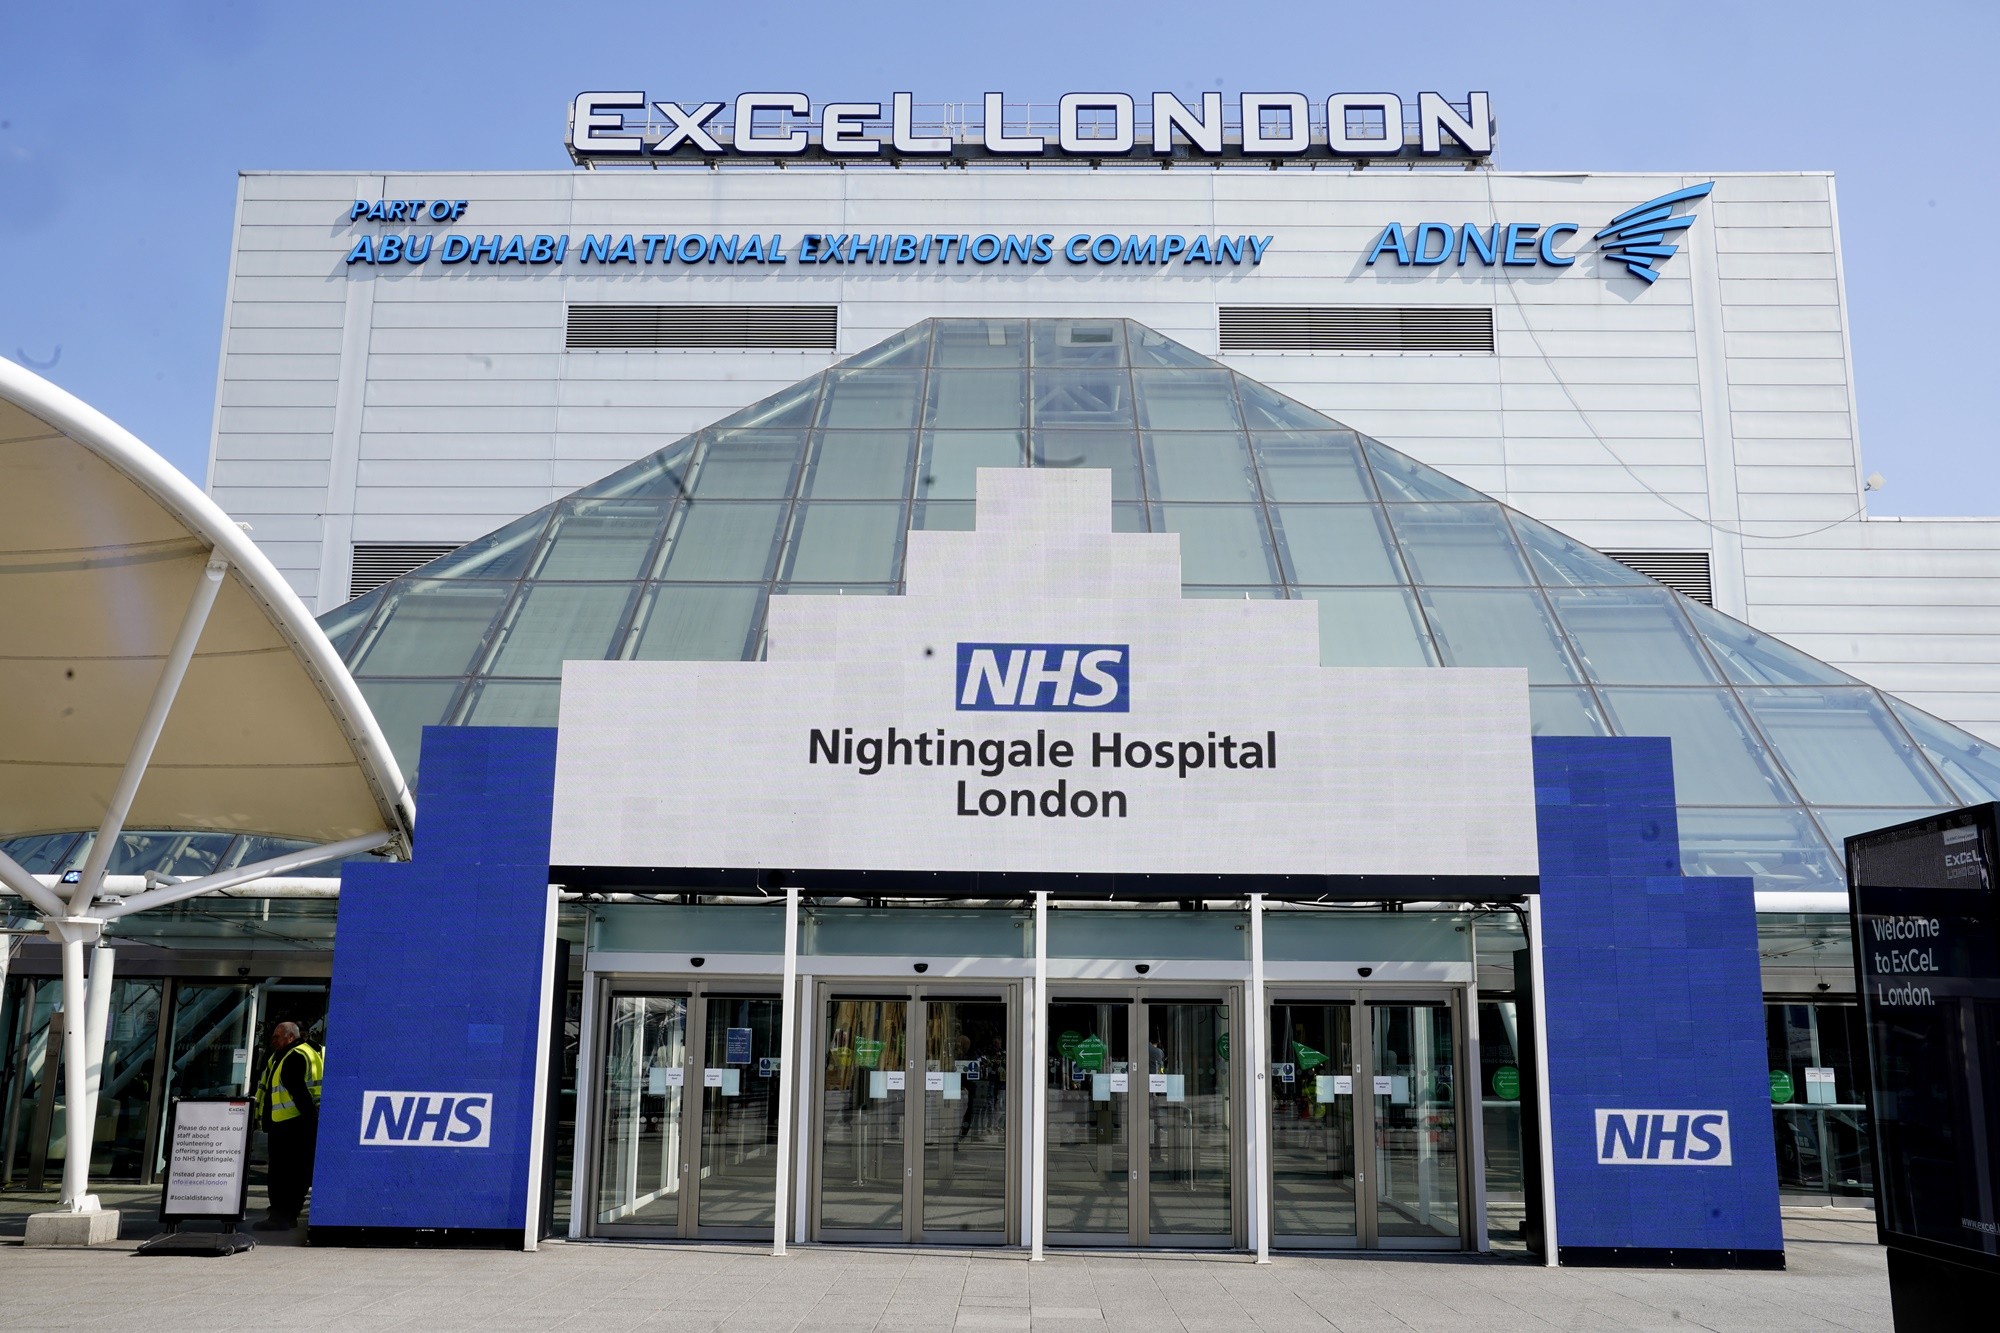 Civil Engineering The incredible effort to construct Nightingale Hospital as the ExCel Centre